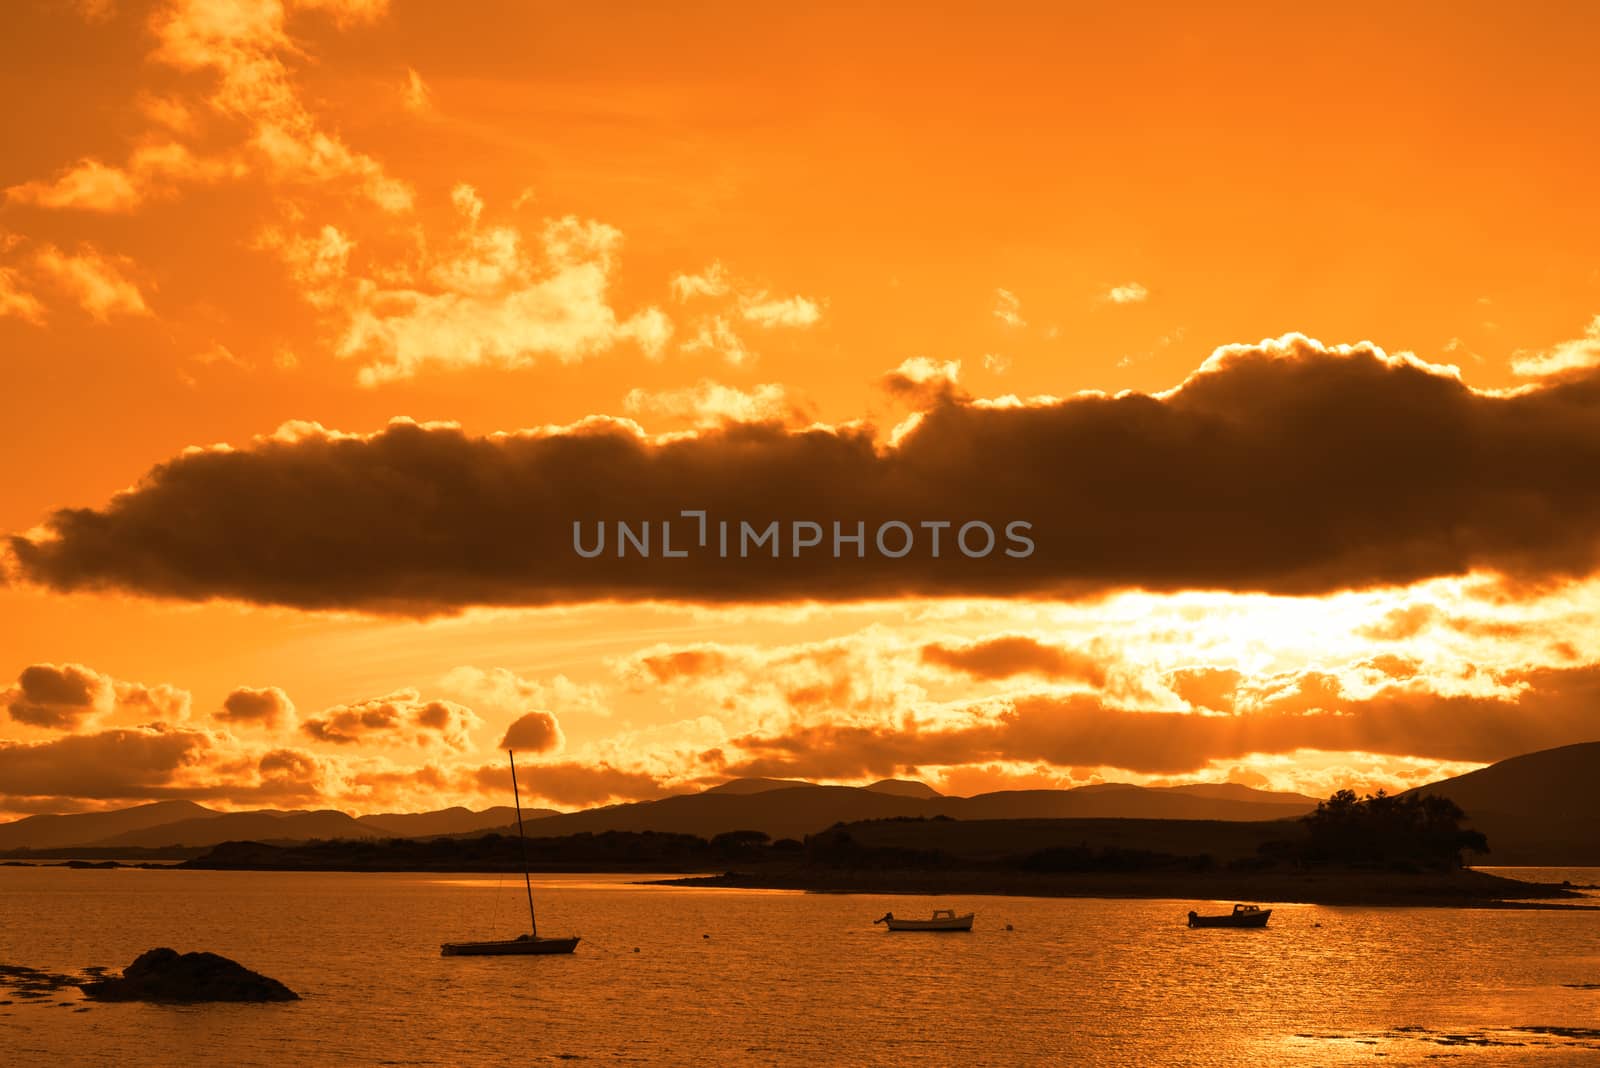 boats in a quiet bay with island near kenmare on the wild atlantic way ireland with an orange sunset